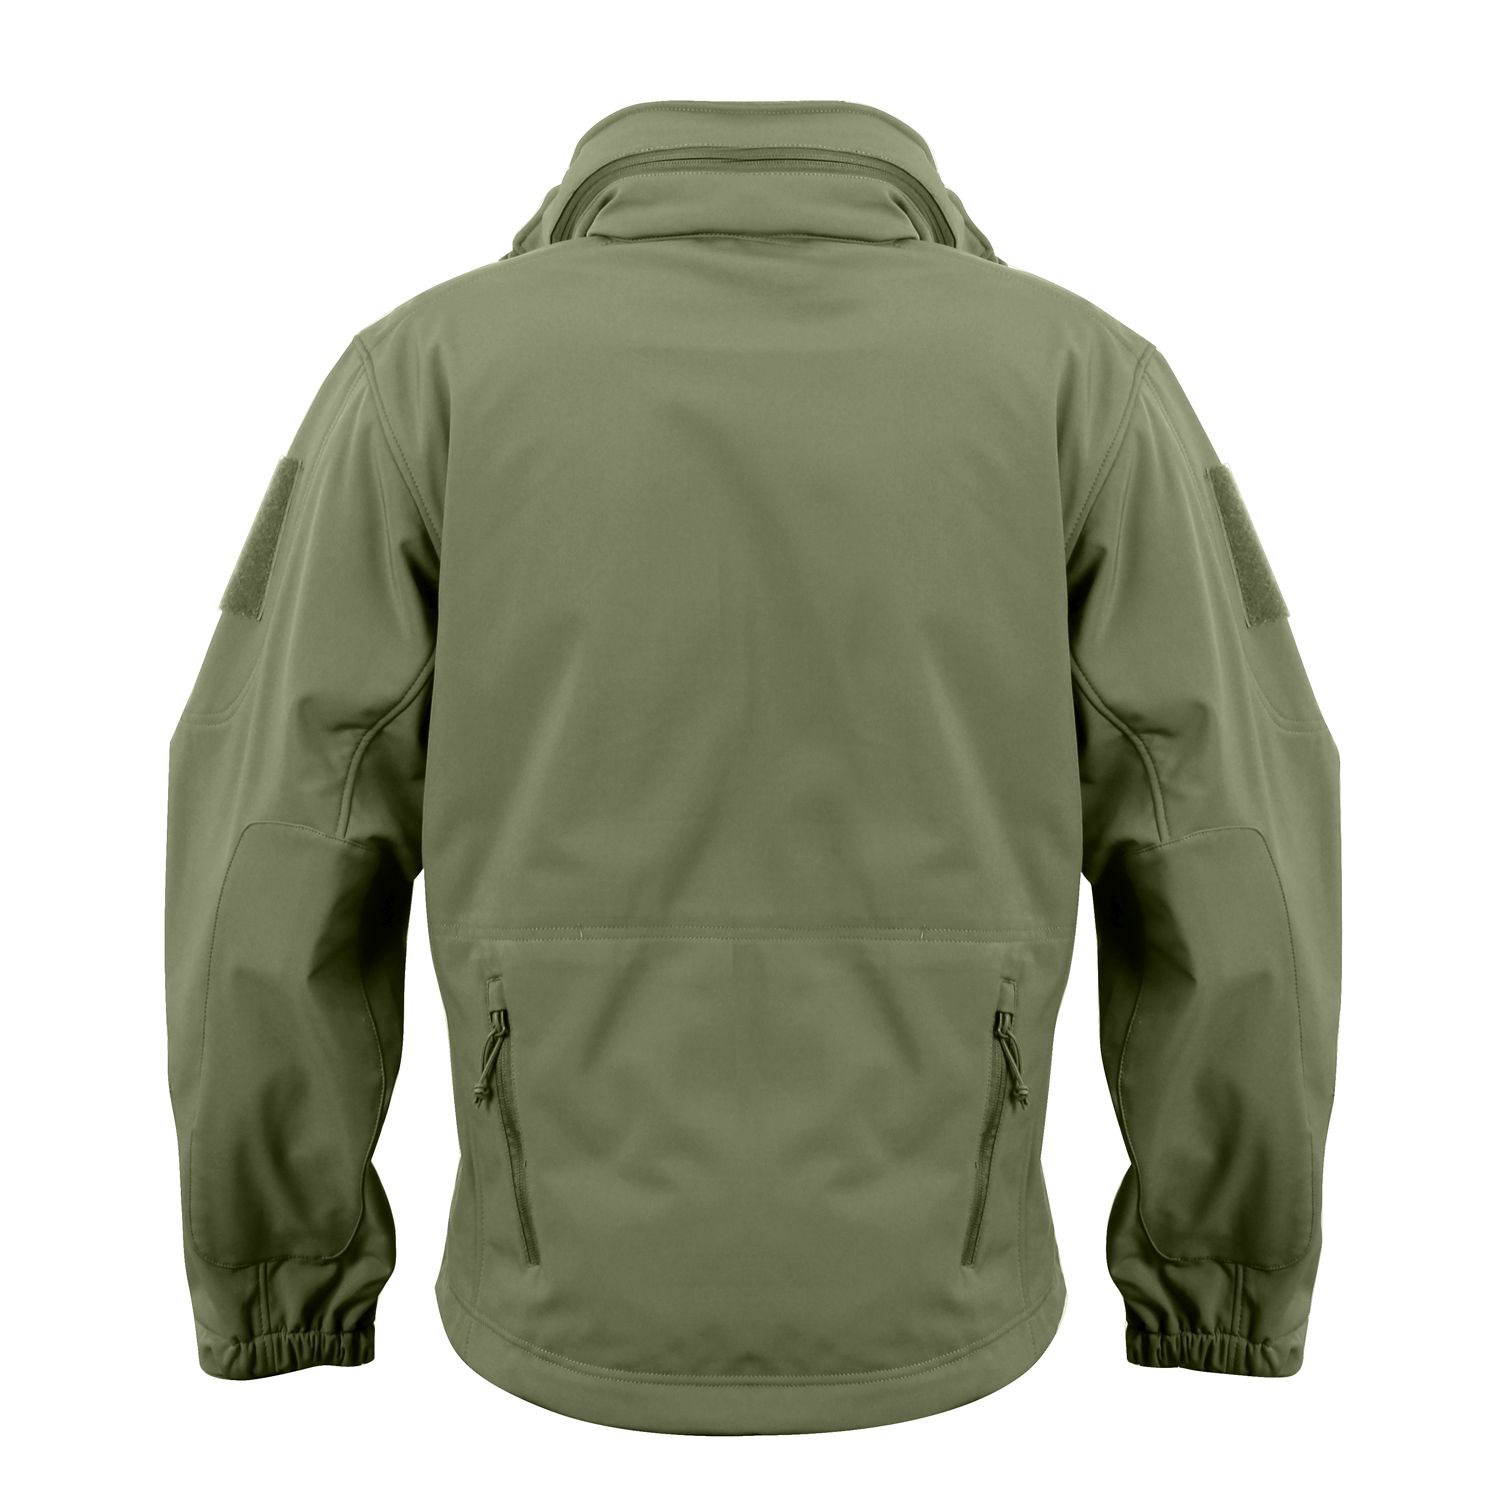 TACTICAL hooded jacket softshell OLIVE ROTHCO 9745 L-11